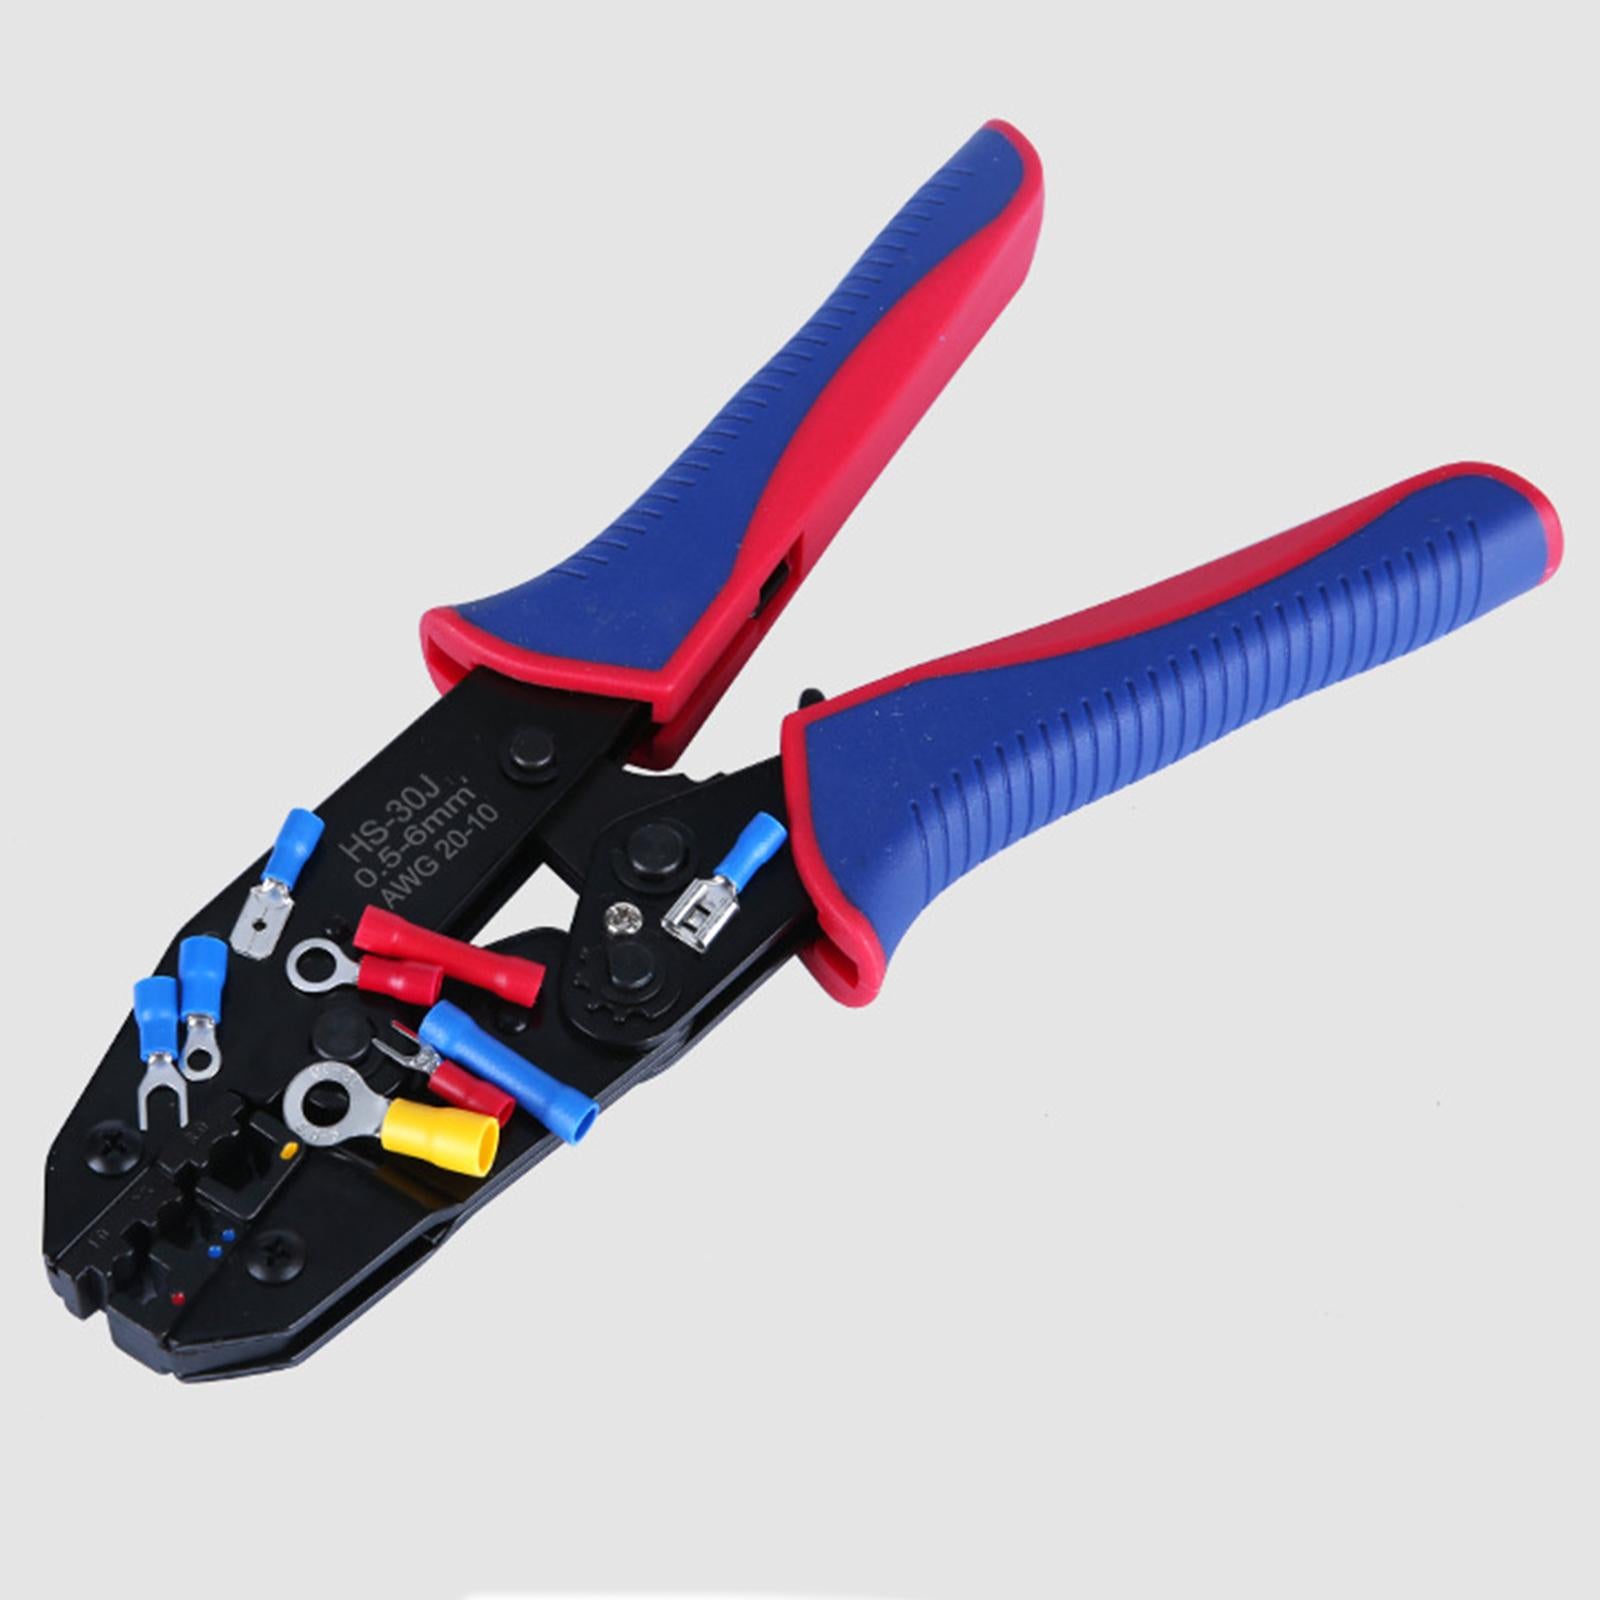 Steel Heavy Duty Ferrule Crimping Tool Cable Cutter for Copper Lugs 0.5-6mm2 Plier 300 Terminal